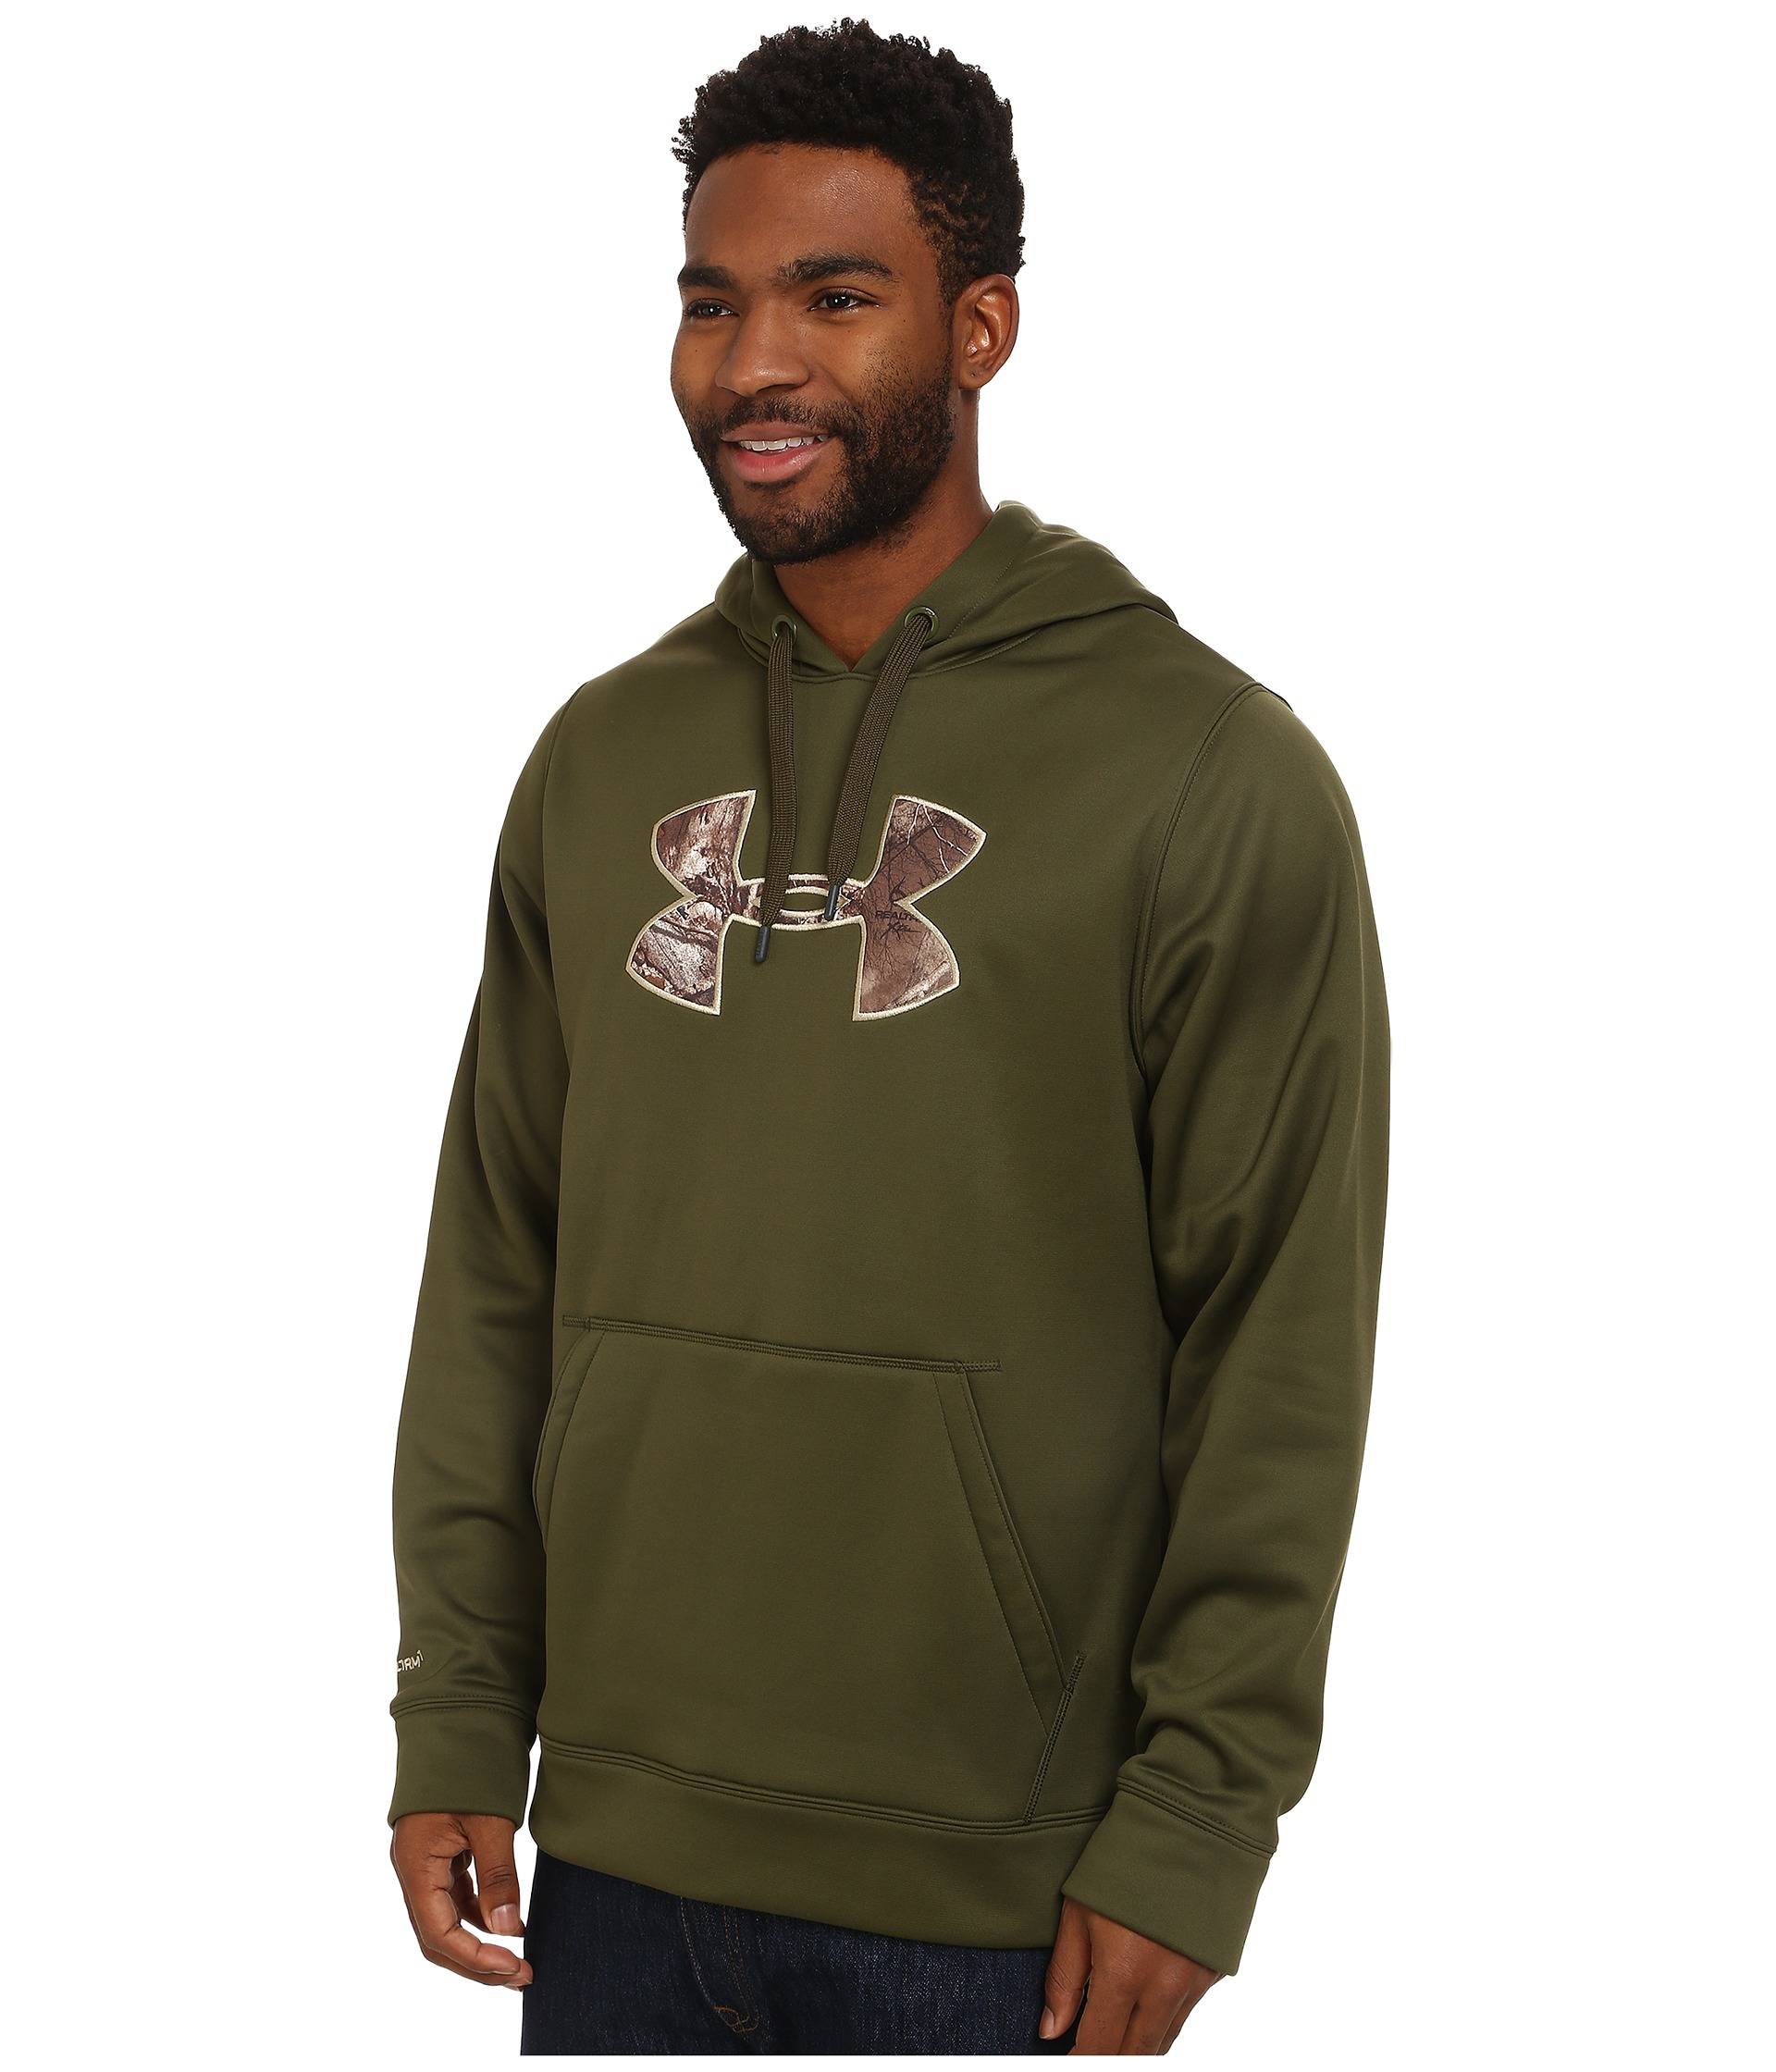 Under Armour Storm Caliber Hoodie in Green for Men - Lyst